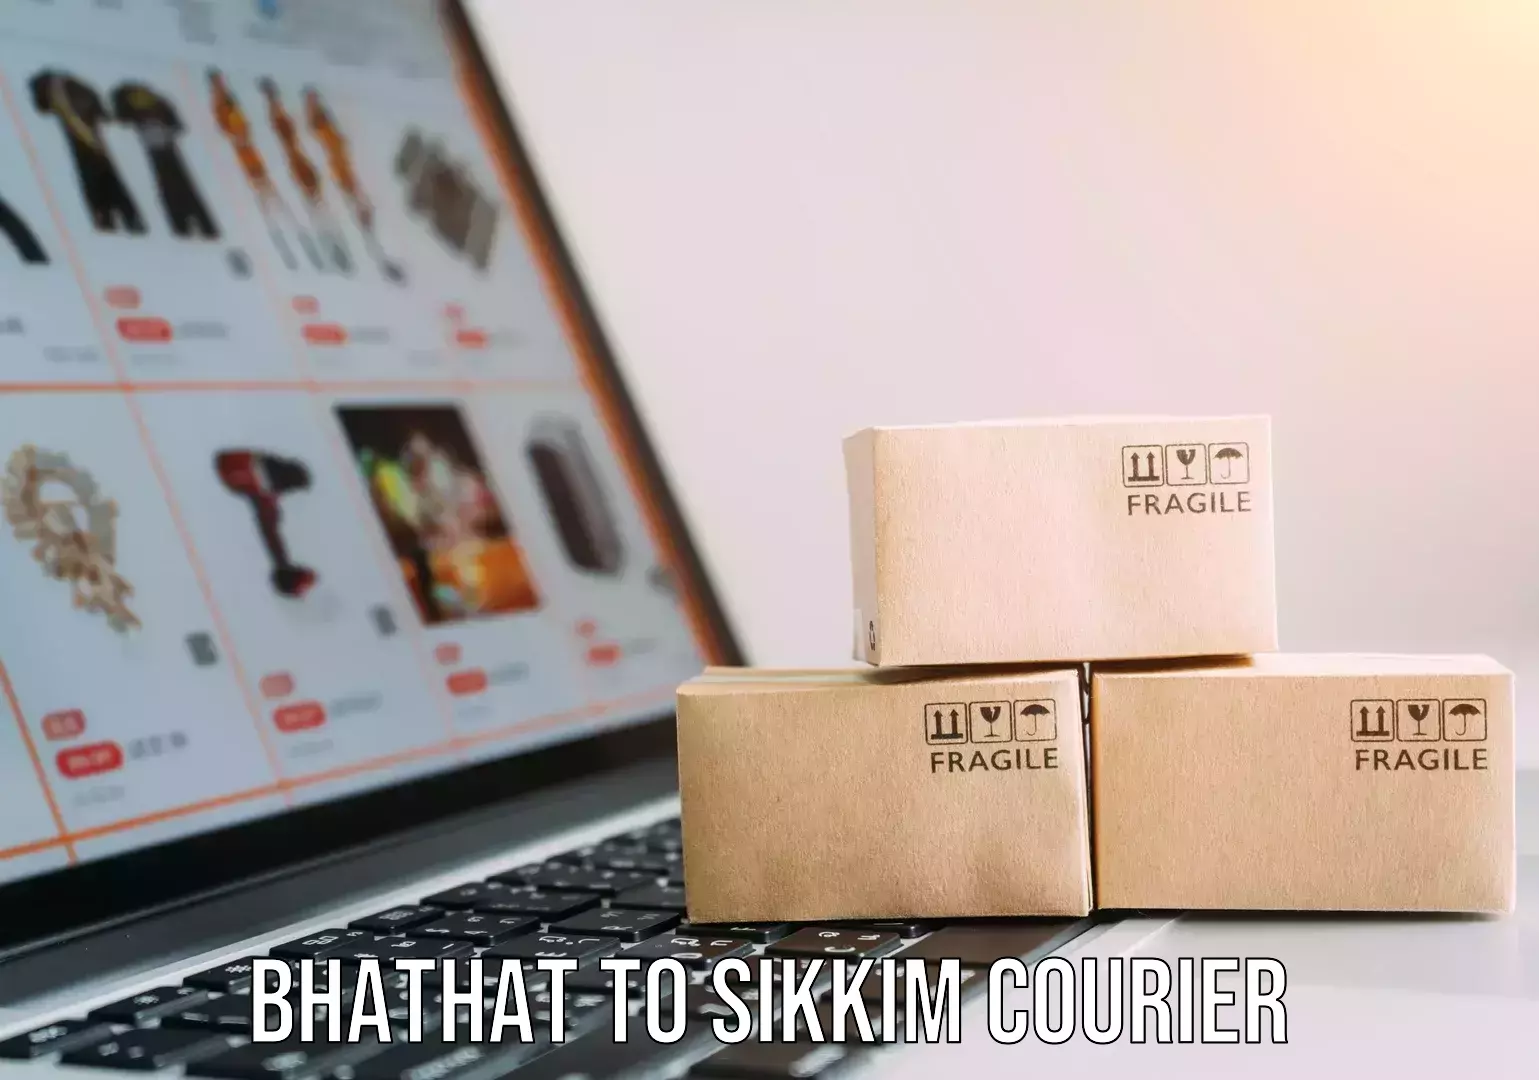 Nationwide parcel services Bhathat to Sikkim